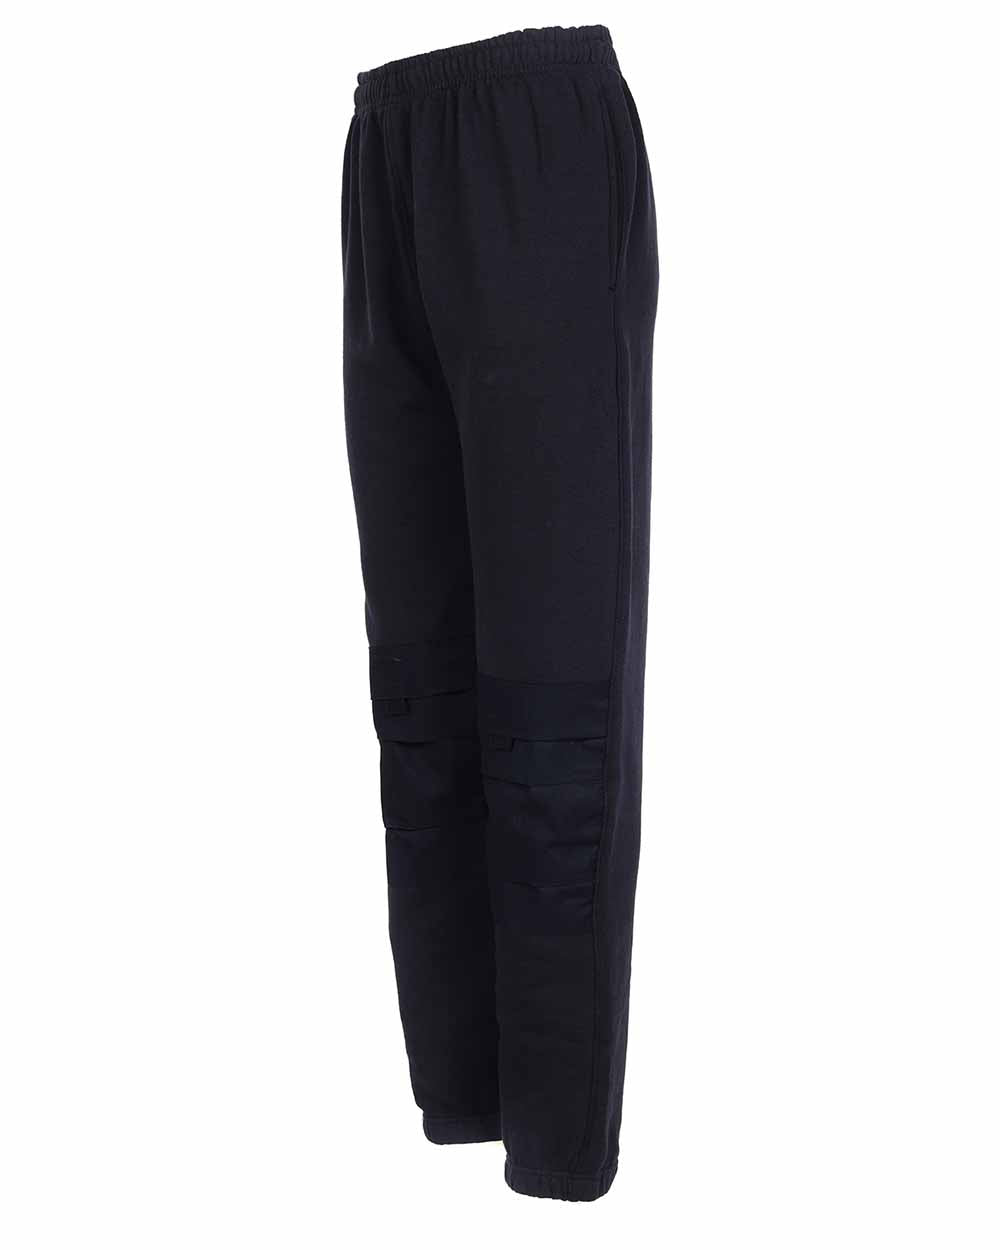 Side pockets and knee pads detail for Navy work joggers TuffStuff Comfort Work Trouser in Navy 